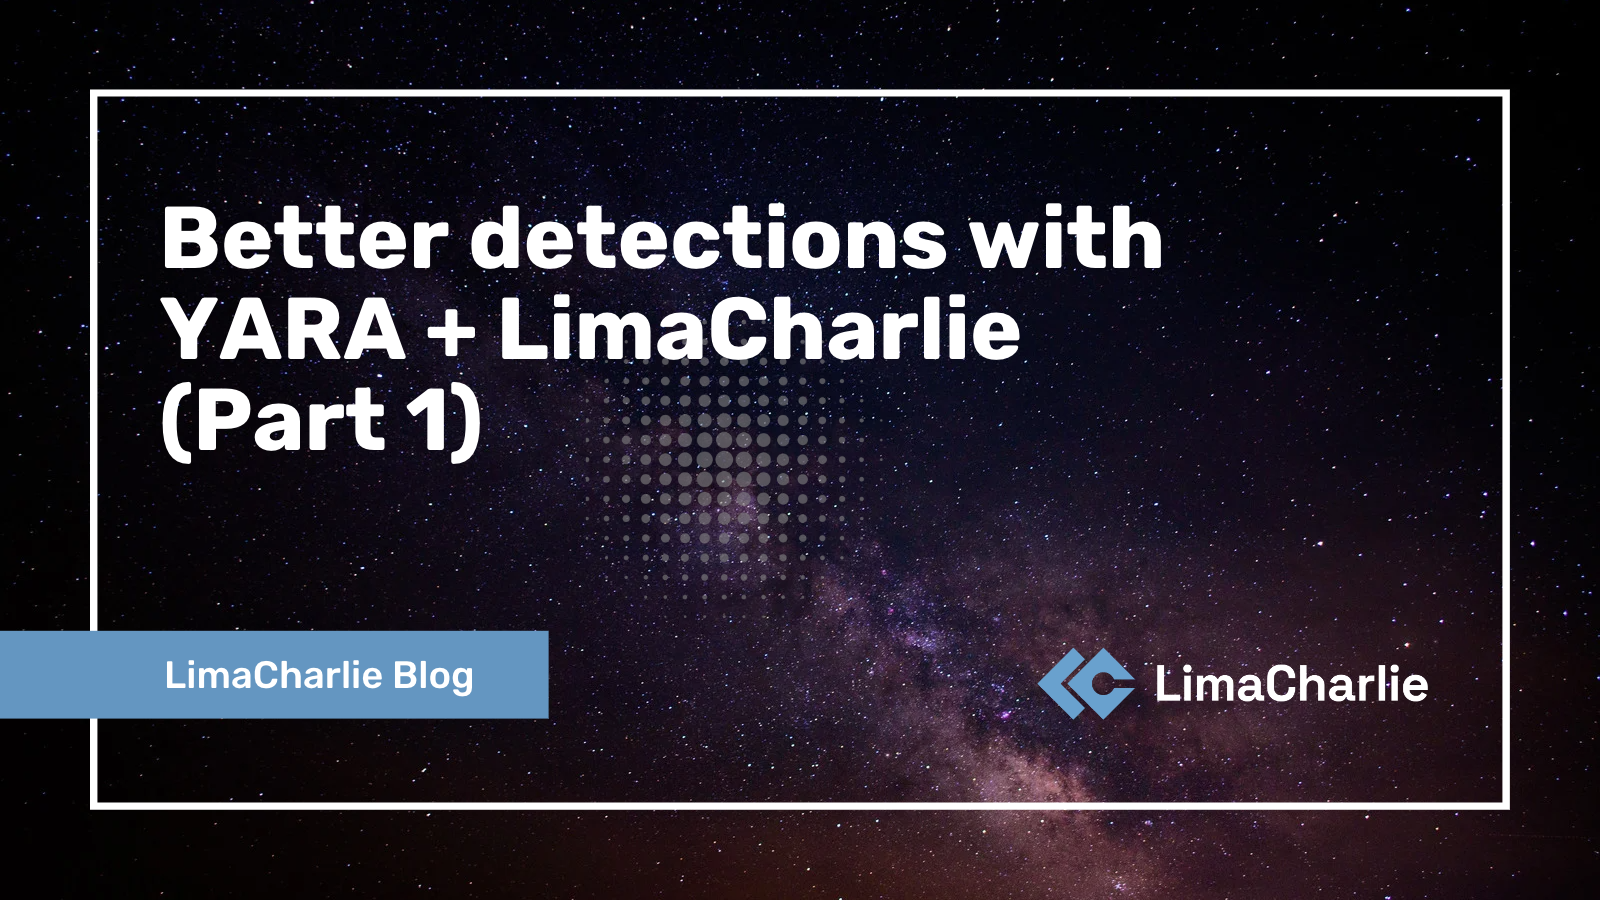 Better detection with YARA + LimaCharlie